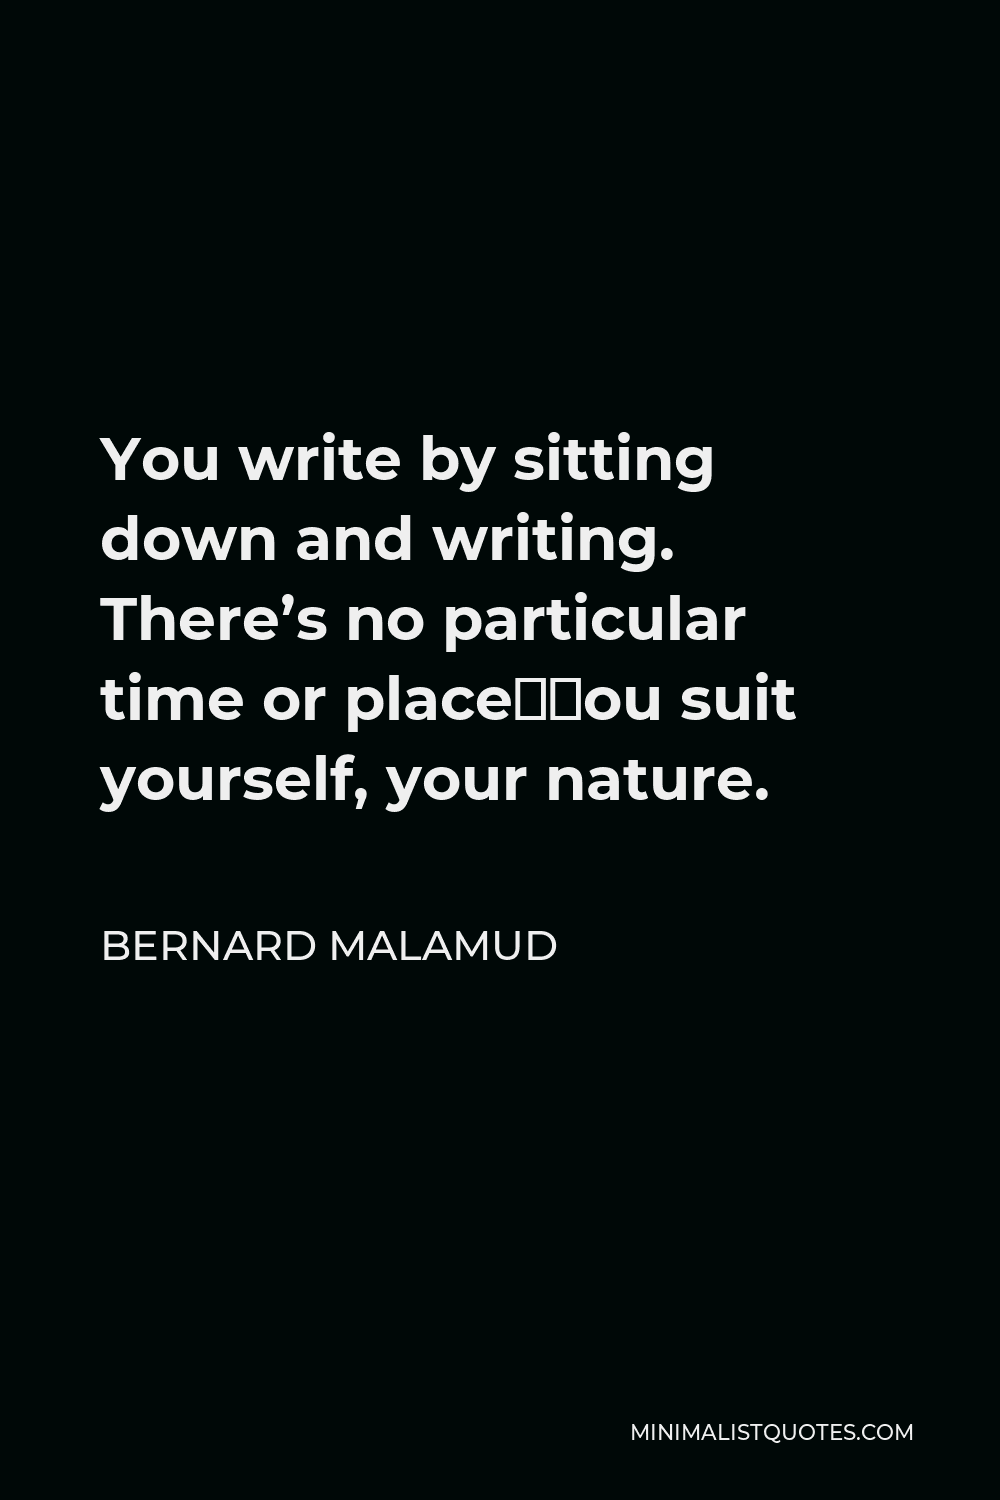 Bernard Malamud Quote - You write by sitting down and writing. There’s no particular time or place—you suit yourself, your nature.